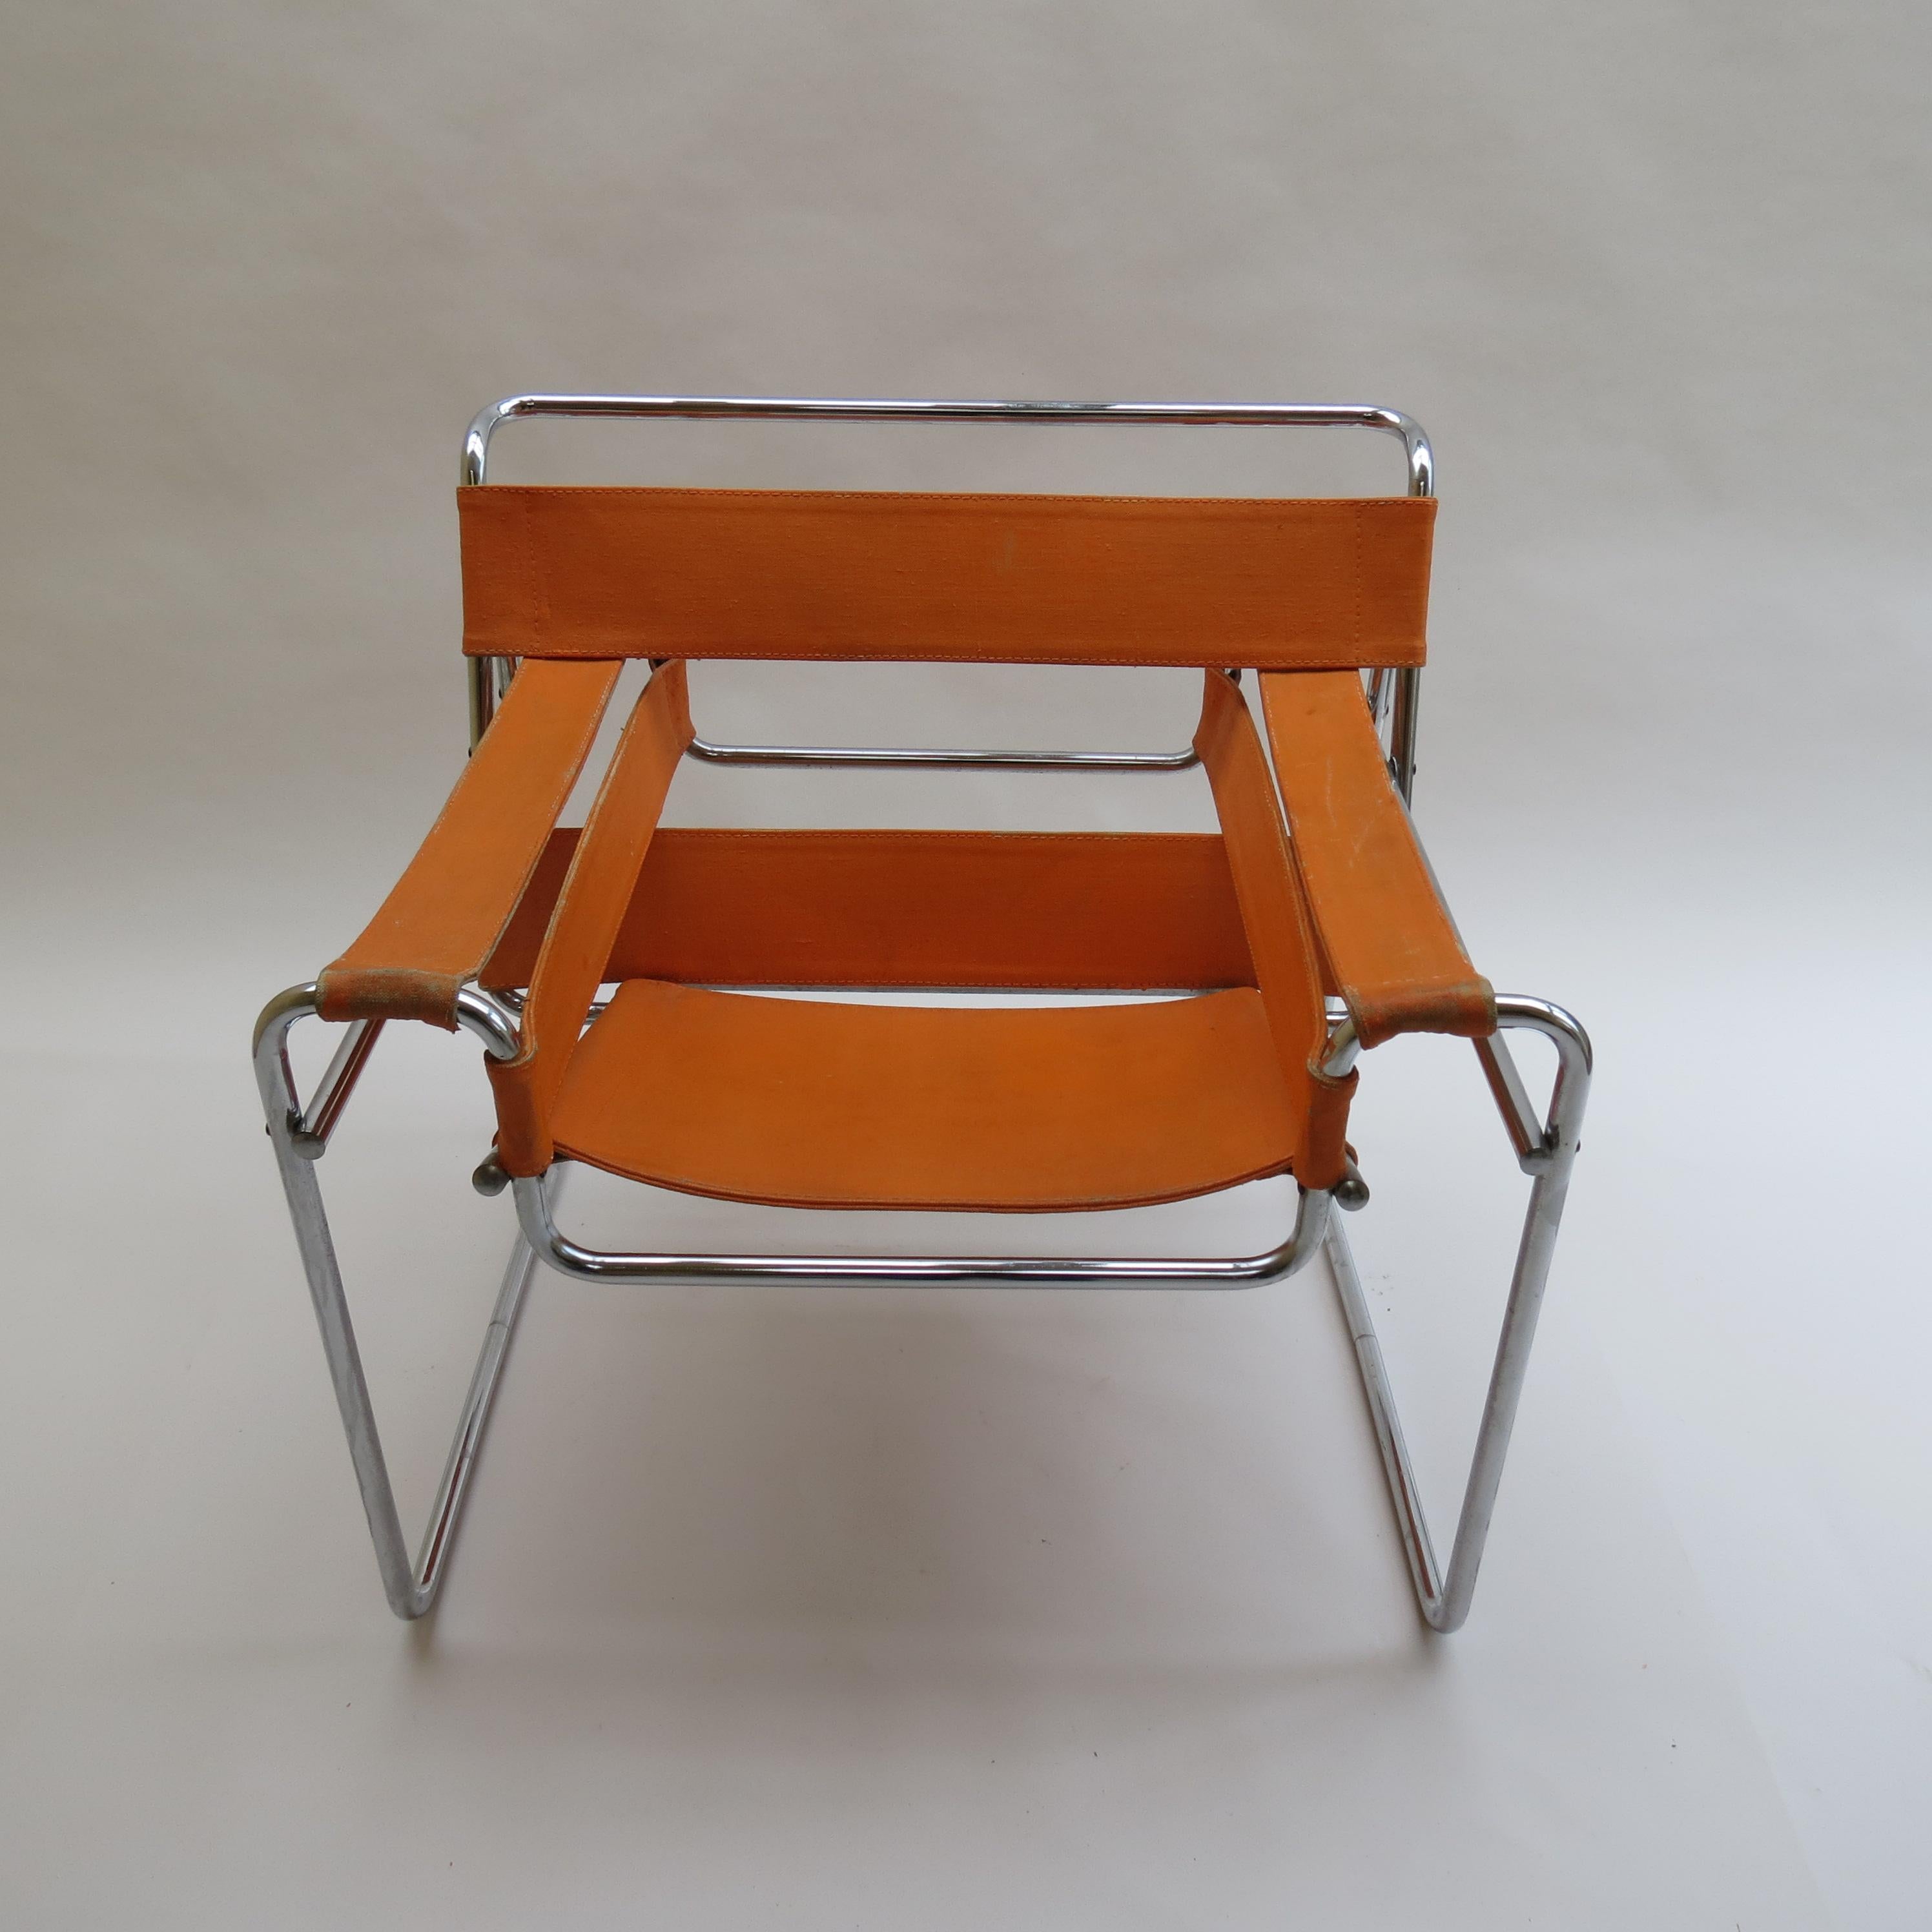 Wassily armchair, designed by Marcel Breuer and manufactured by Gavina, Italy in the 1960s, original year of design 1925. Gavina produced the Wassily chair under license between 1962 and 1968, then Knoll purchased the Gavina company and took over